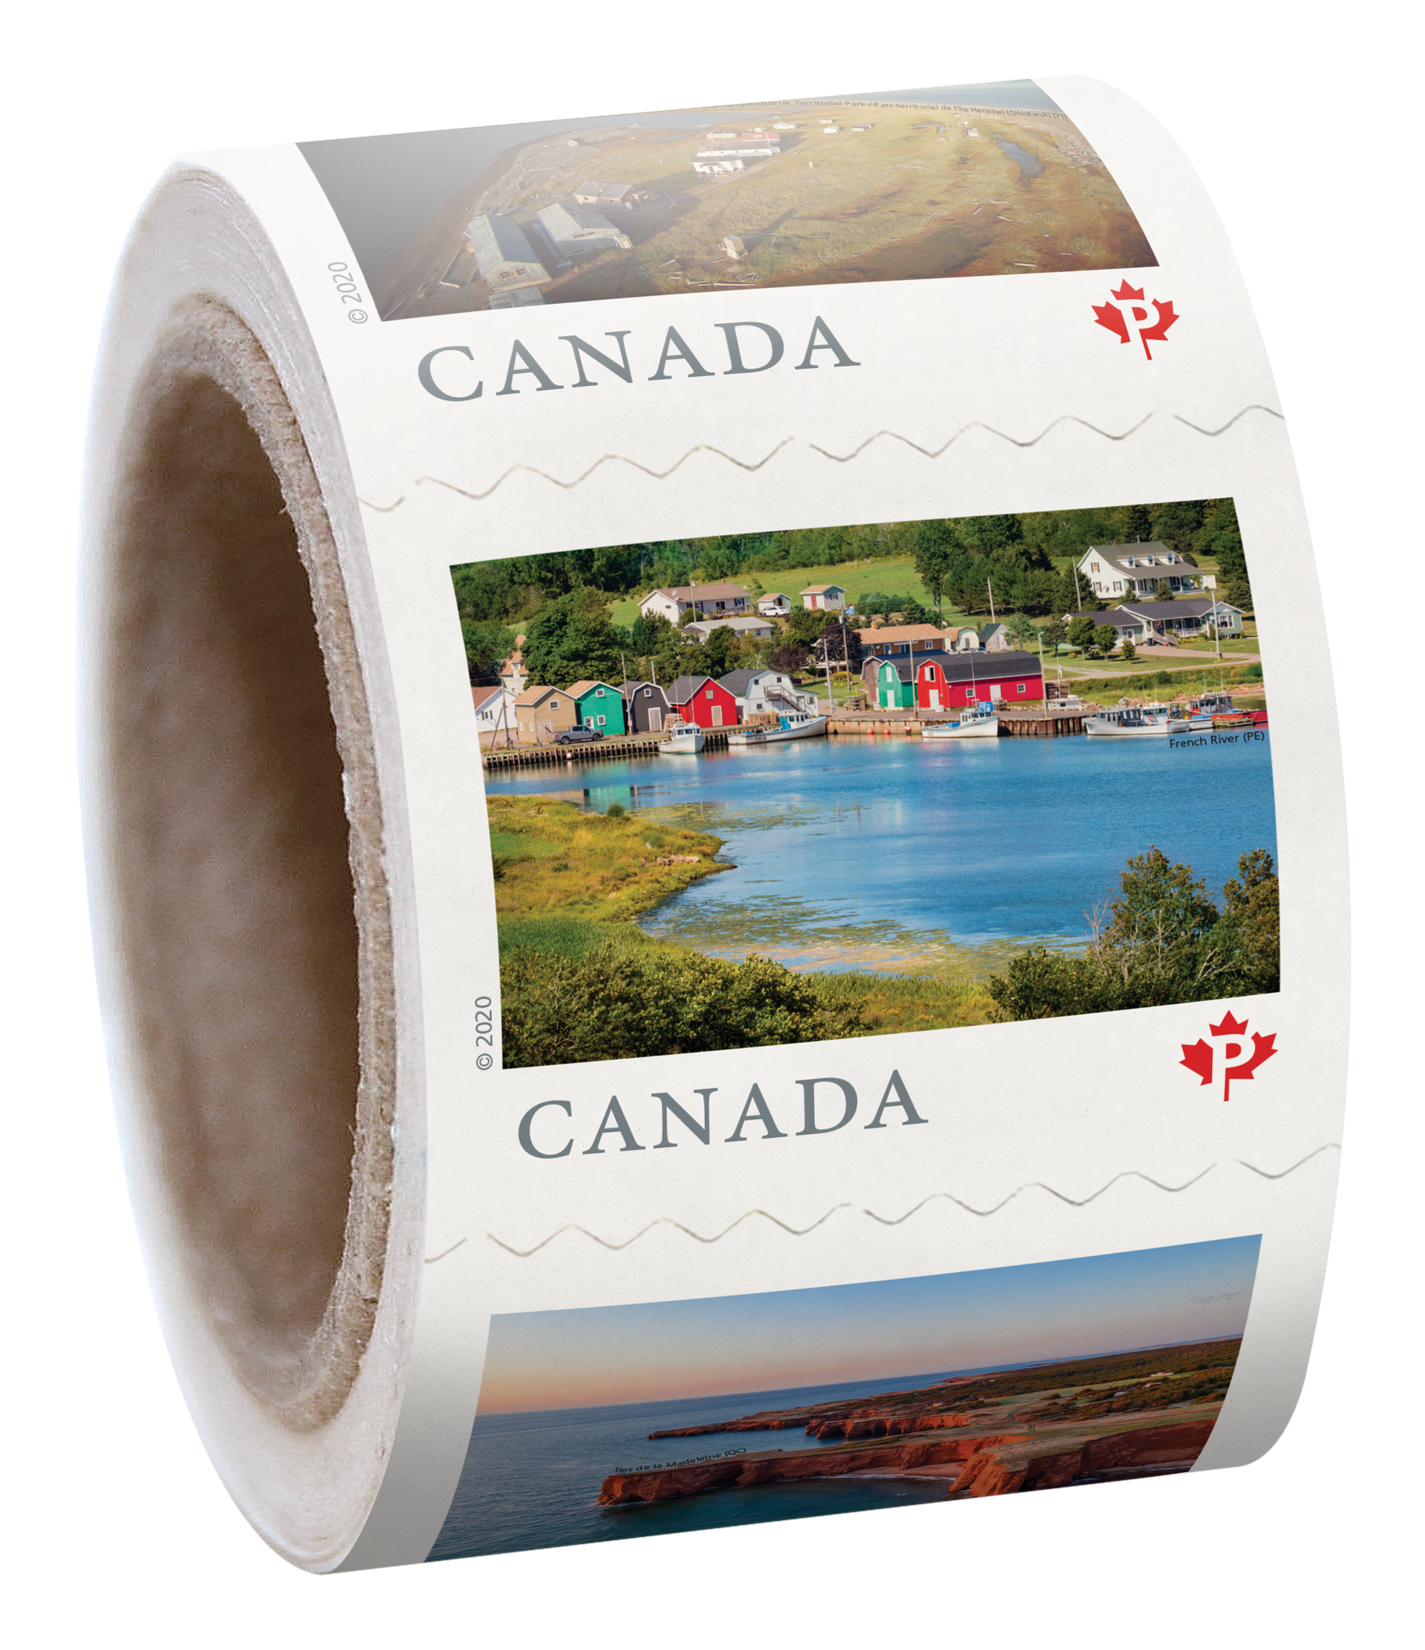 From Far and Wide 2020: Permanent<sup>TM</sup> domestic rate stamps - coil  of 100 - Canada Post